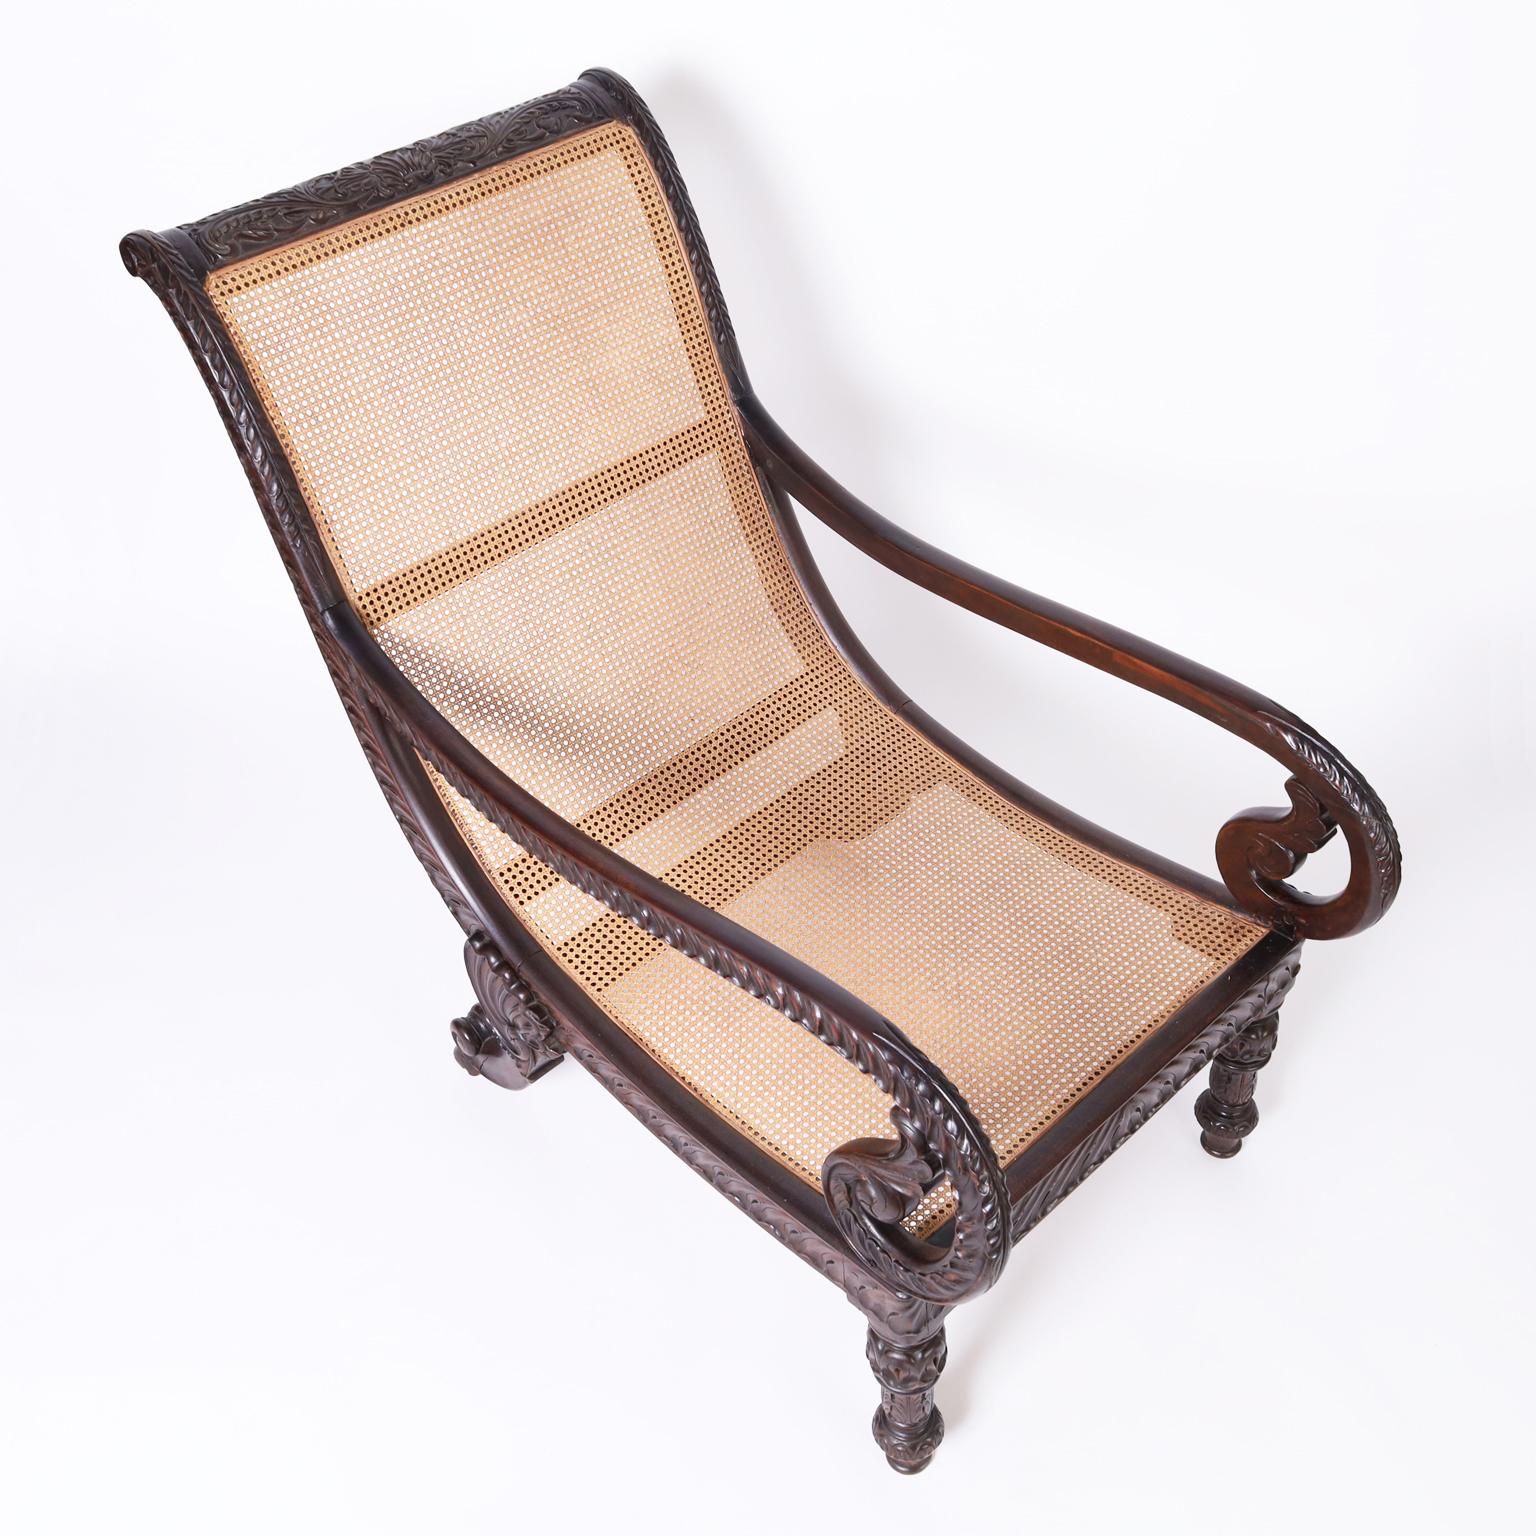 Impressive British Colonial plantation chair crafted in mahogany in a graceful form with dramatic carved ocean and floral motifs on the back and rolled arms, having caned seat and back and legs carved with acanthus and sea shell designs.